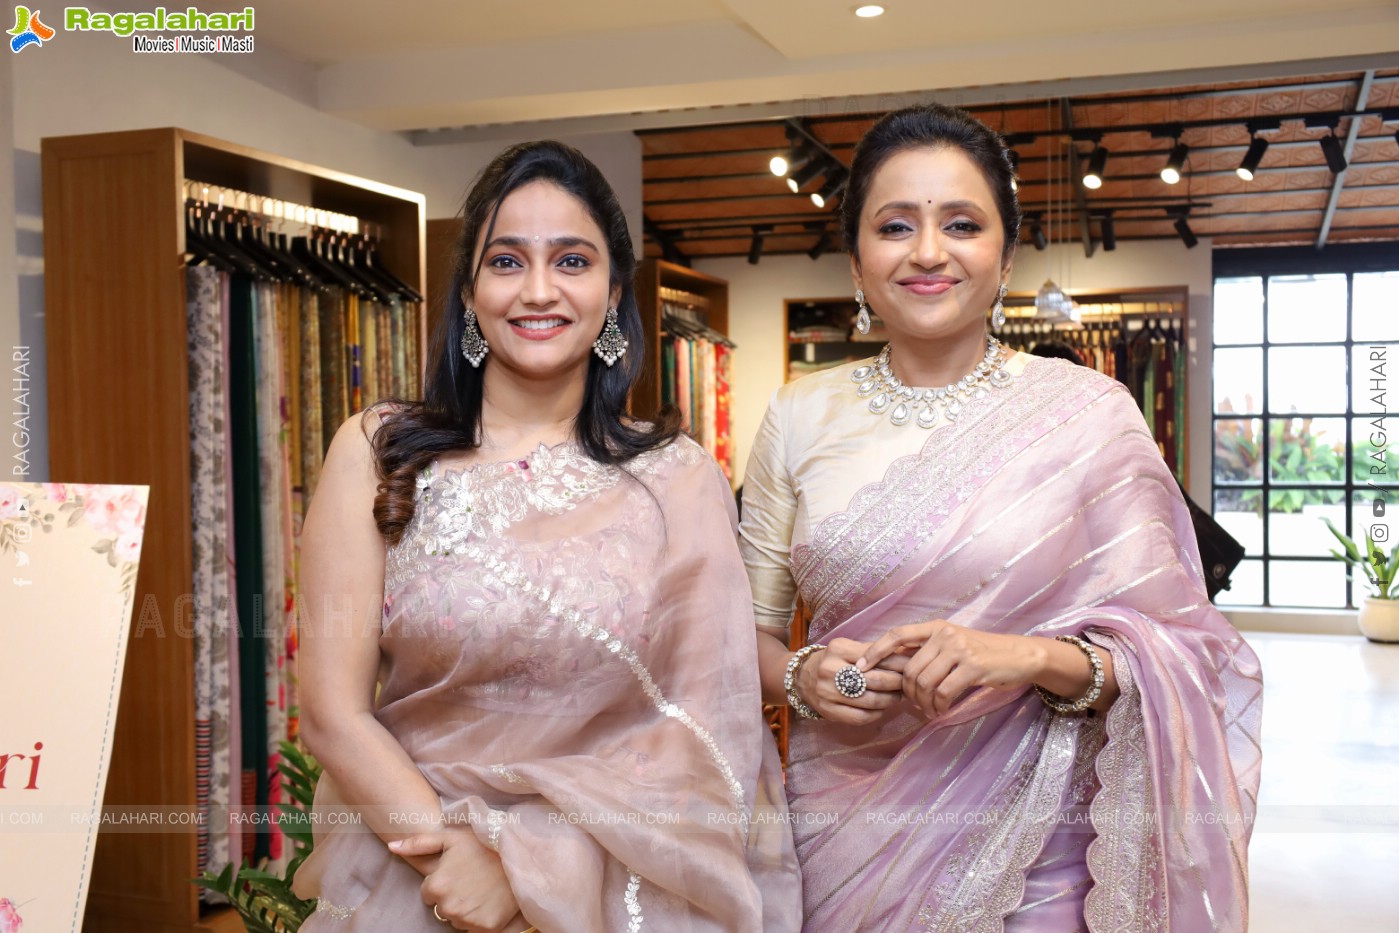 Anchor Suma Launch Manohari Festive collections, XiTI - Weaves of folklore 